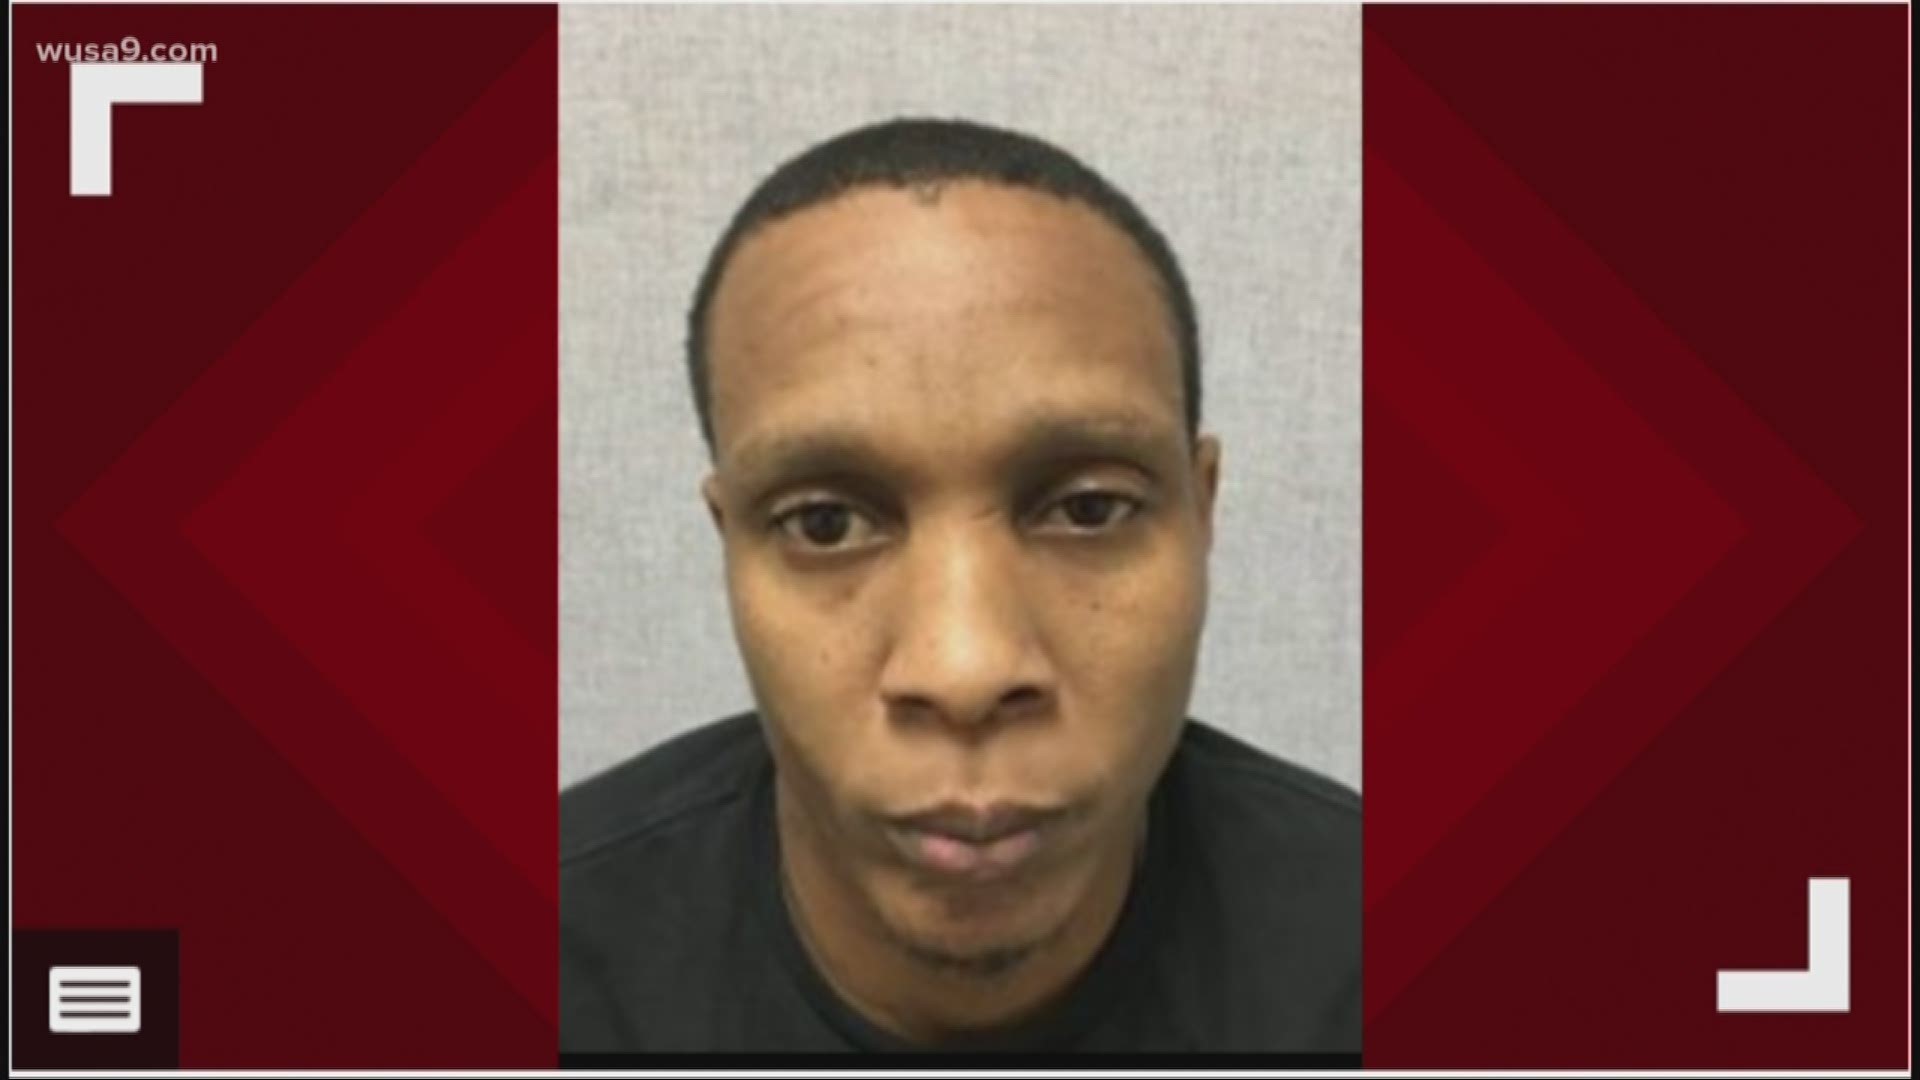 Two life sentences were handed down today for a rapist who targeted women as old as 86 for his attacks. 40-year old Marlon Michael Alexander would've gotten away with it had it not been for new genetic matching technology.